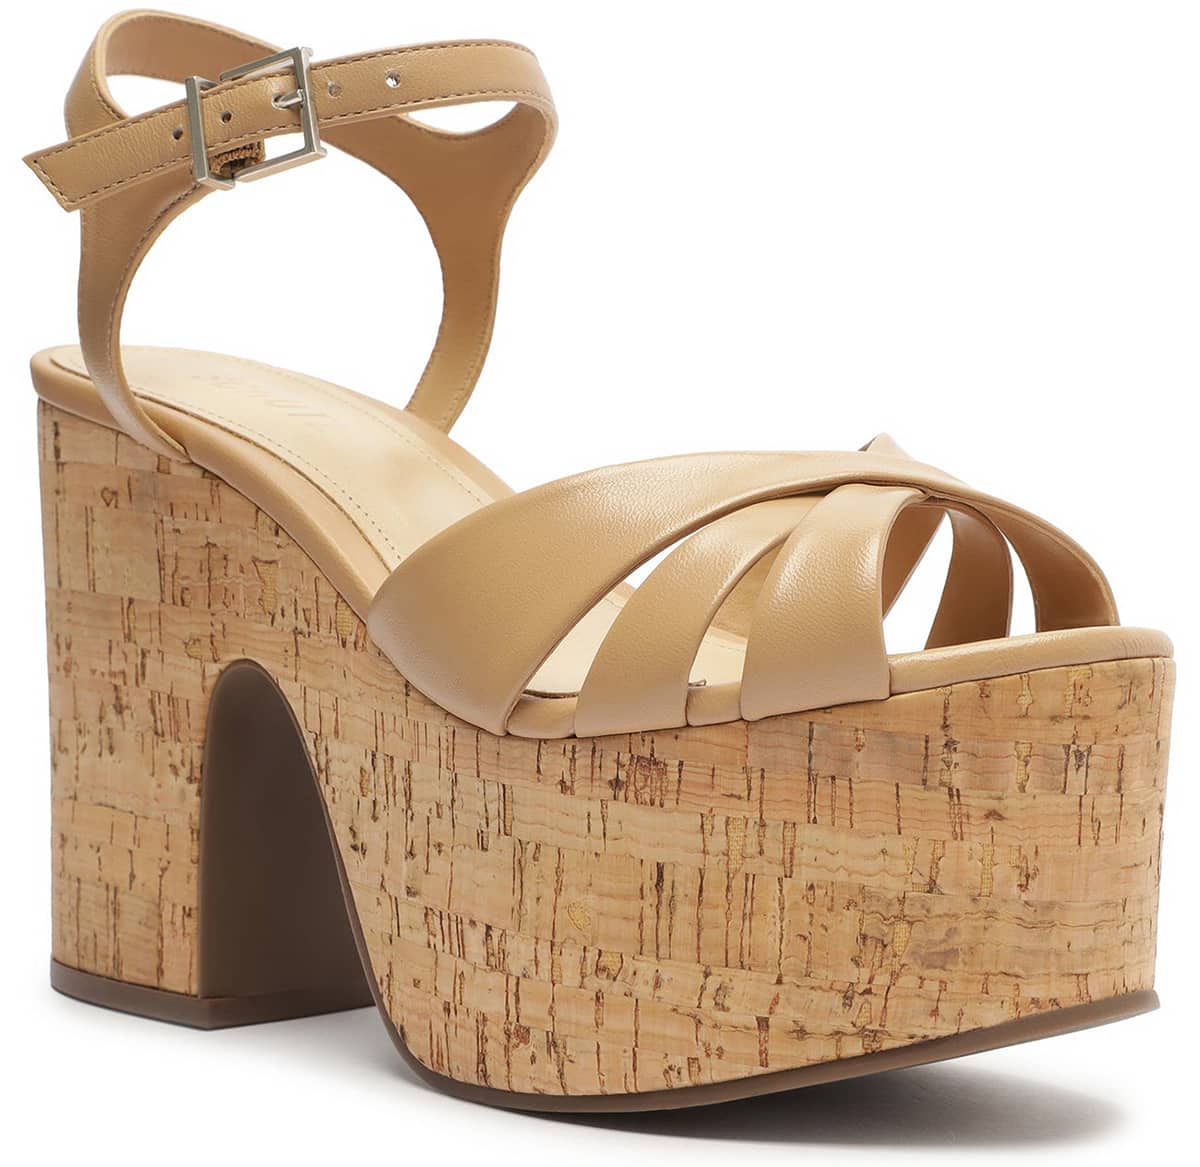 Schutz's Keefa sandals are a popular summer footwear choice, thanks to the chunky cork platforms and heels